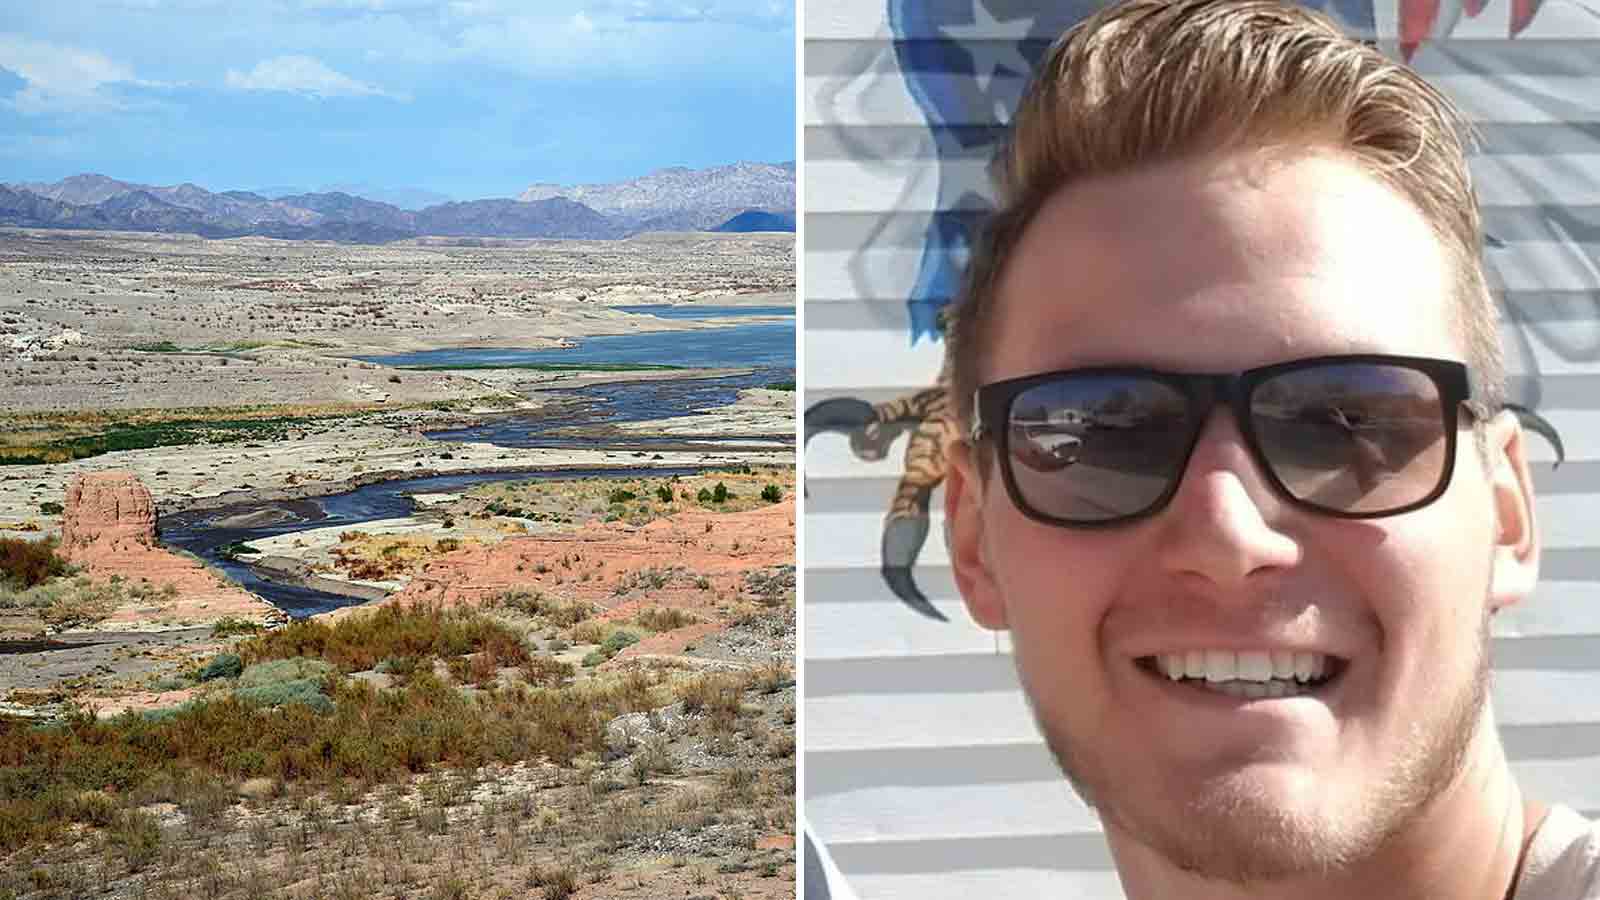 Body found in northwestern Arizona believed to be man who went missing in 2021